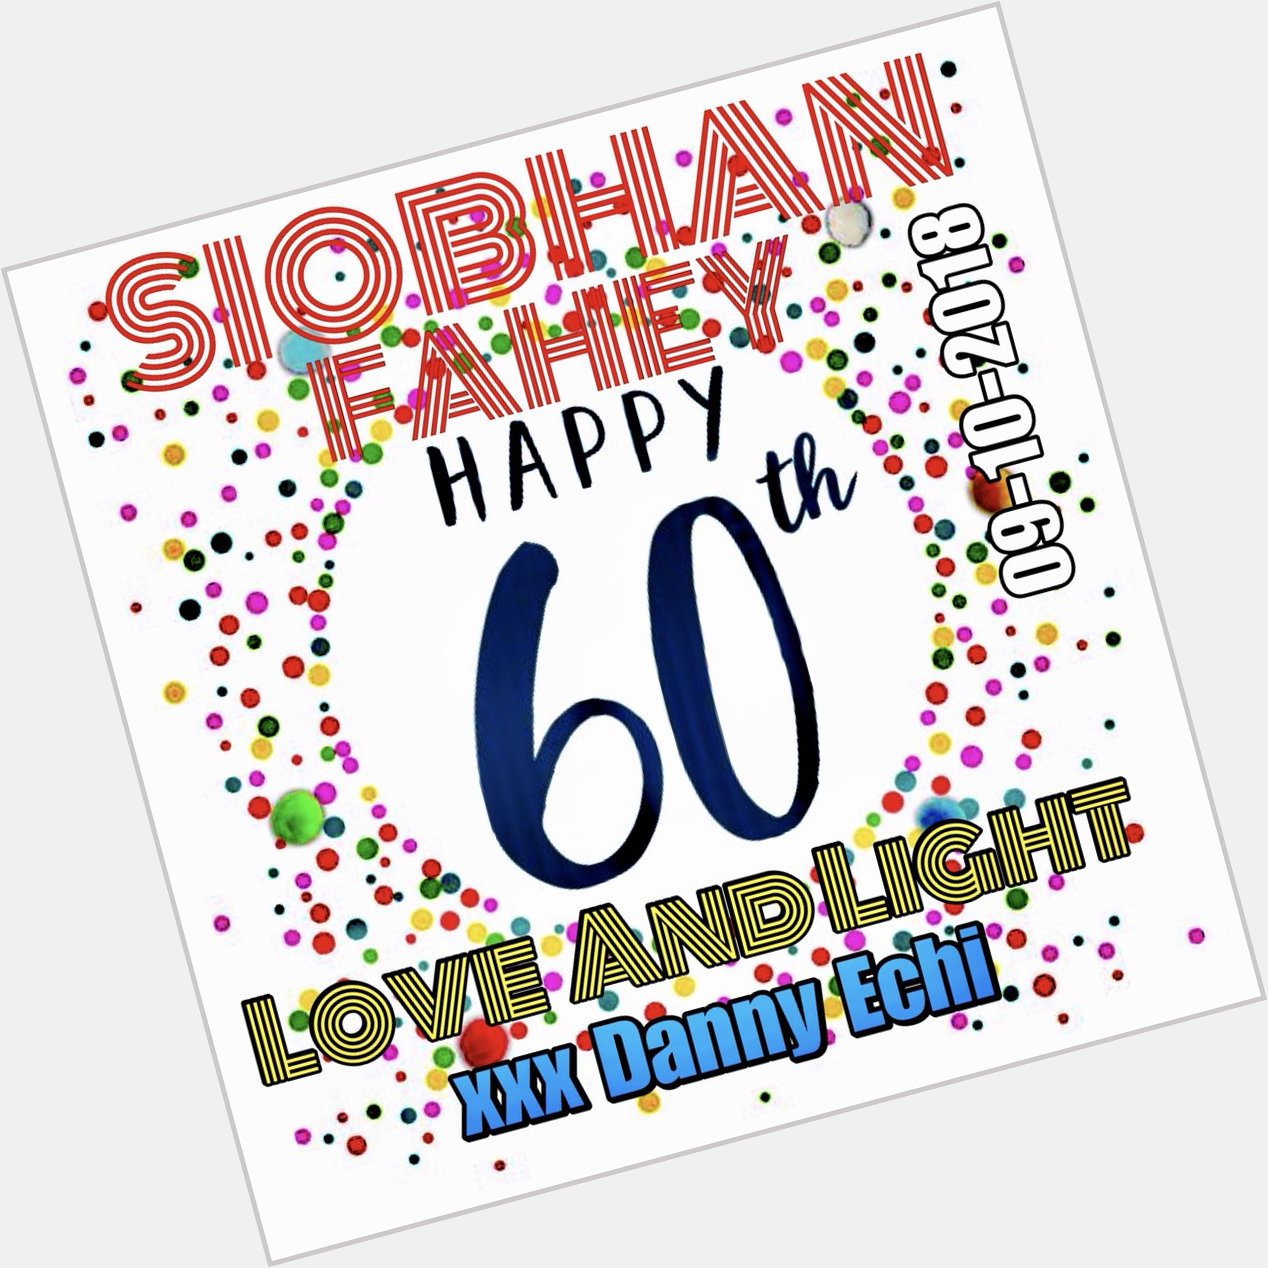          Happy Birthday Siobhan. More love and happiness to you 